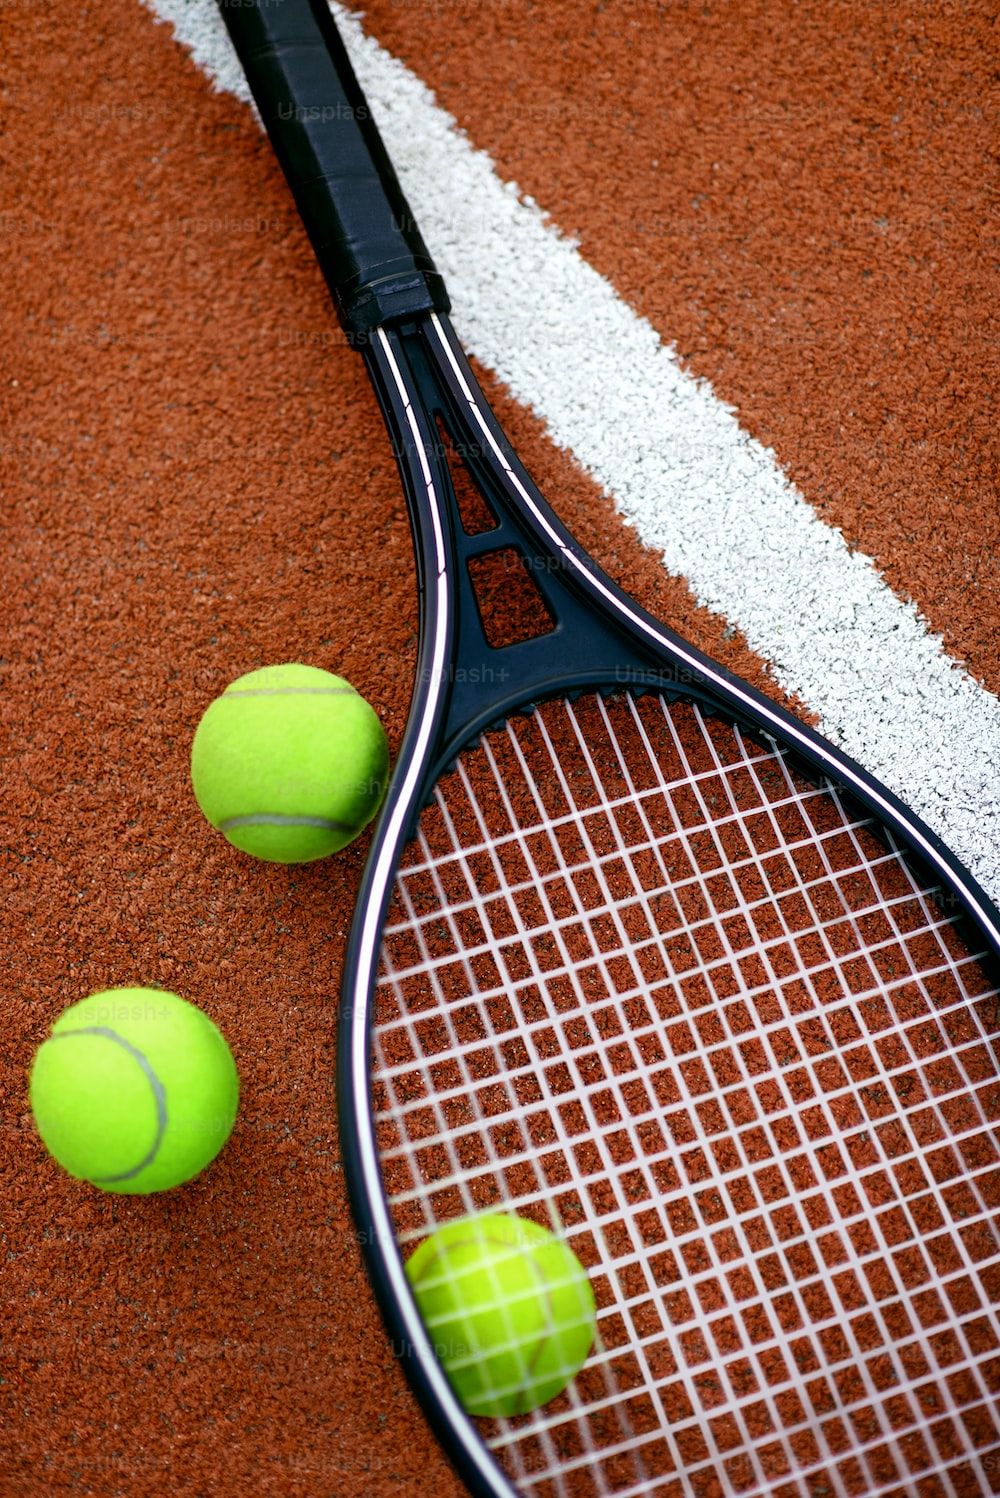 Tennis Picture. Download Free Image